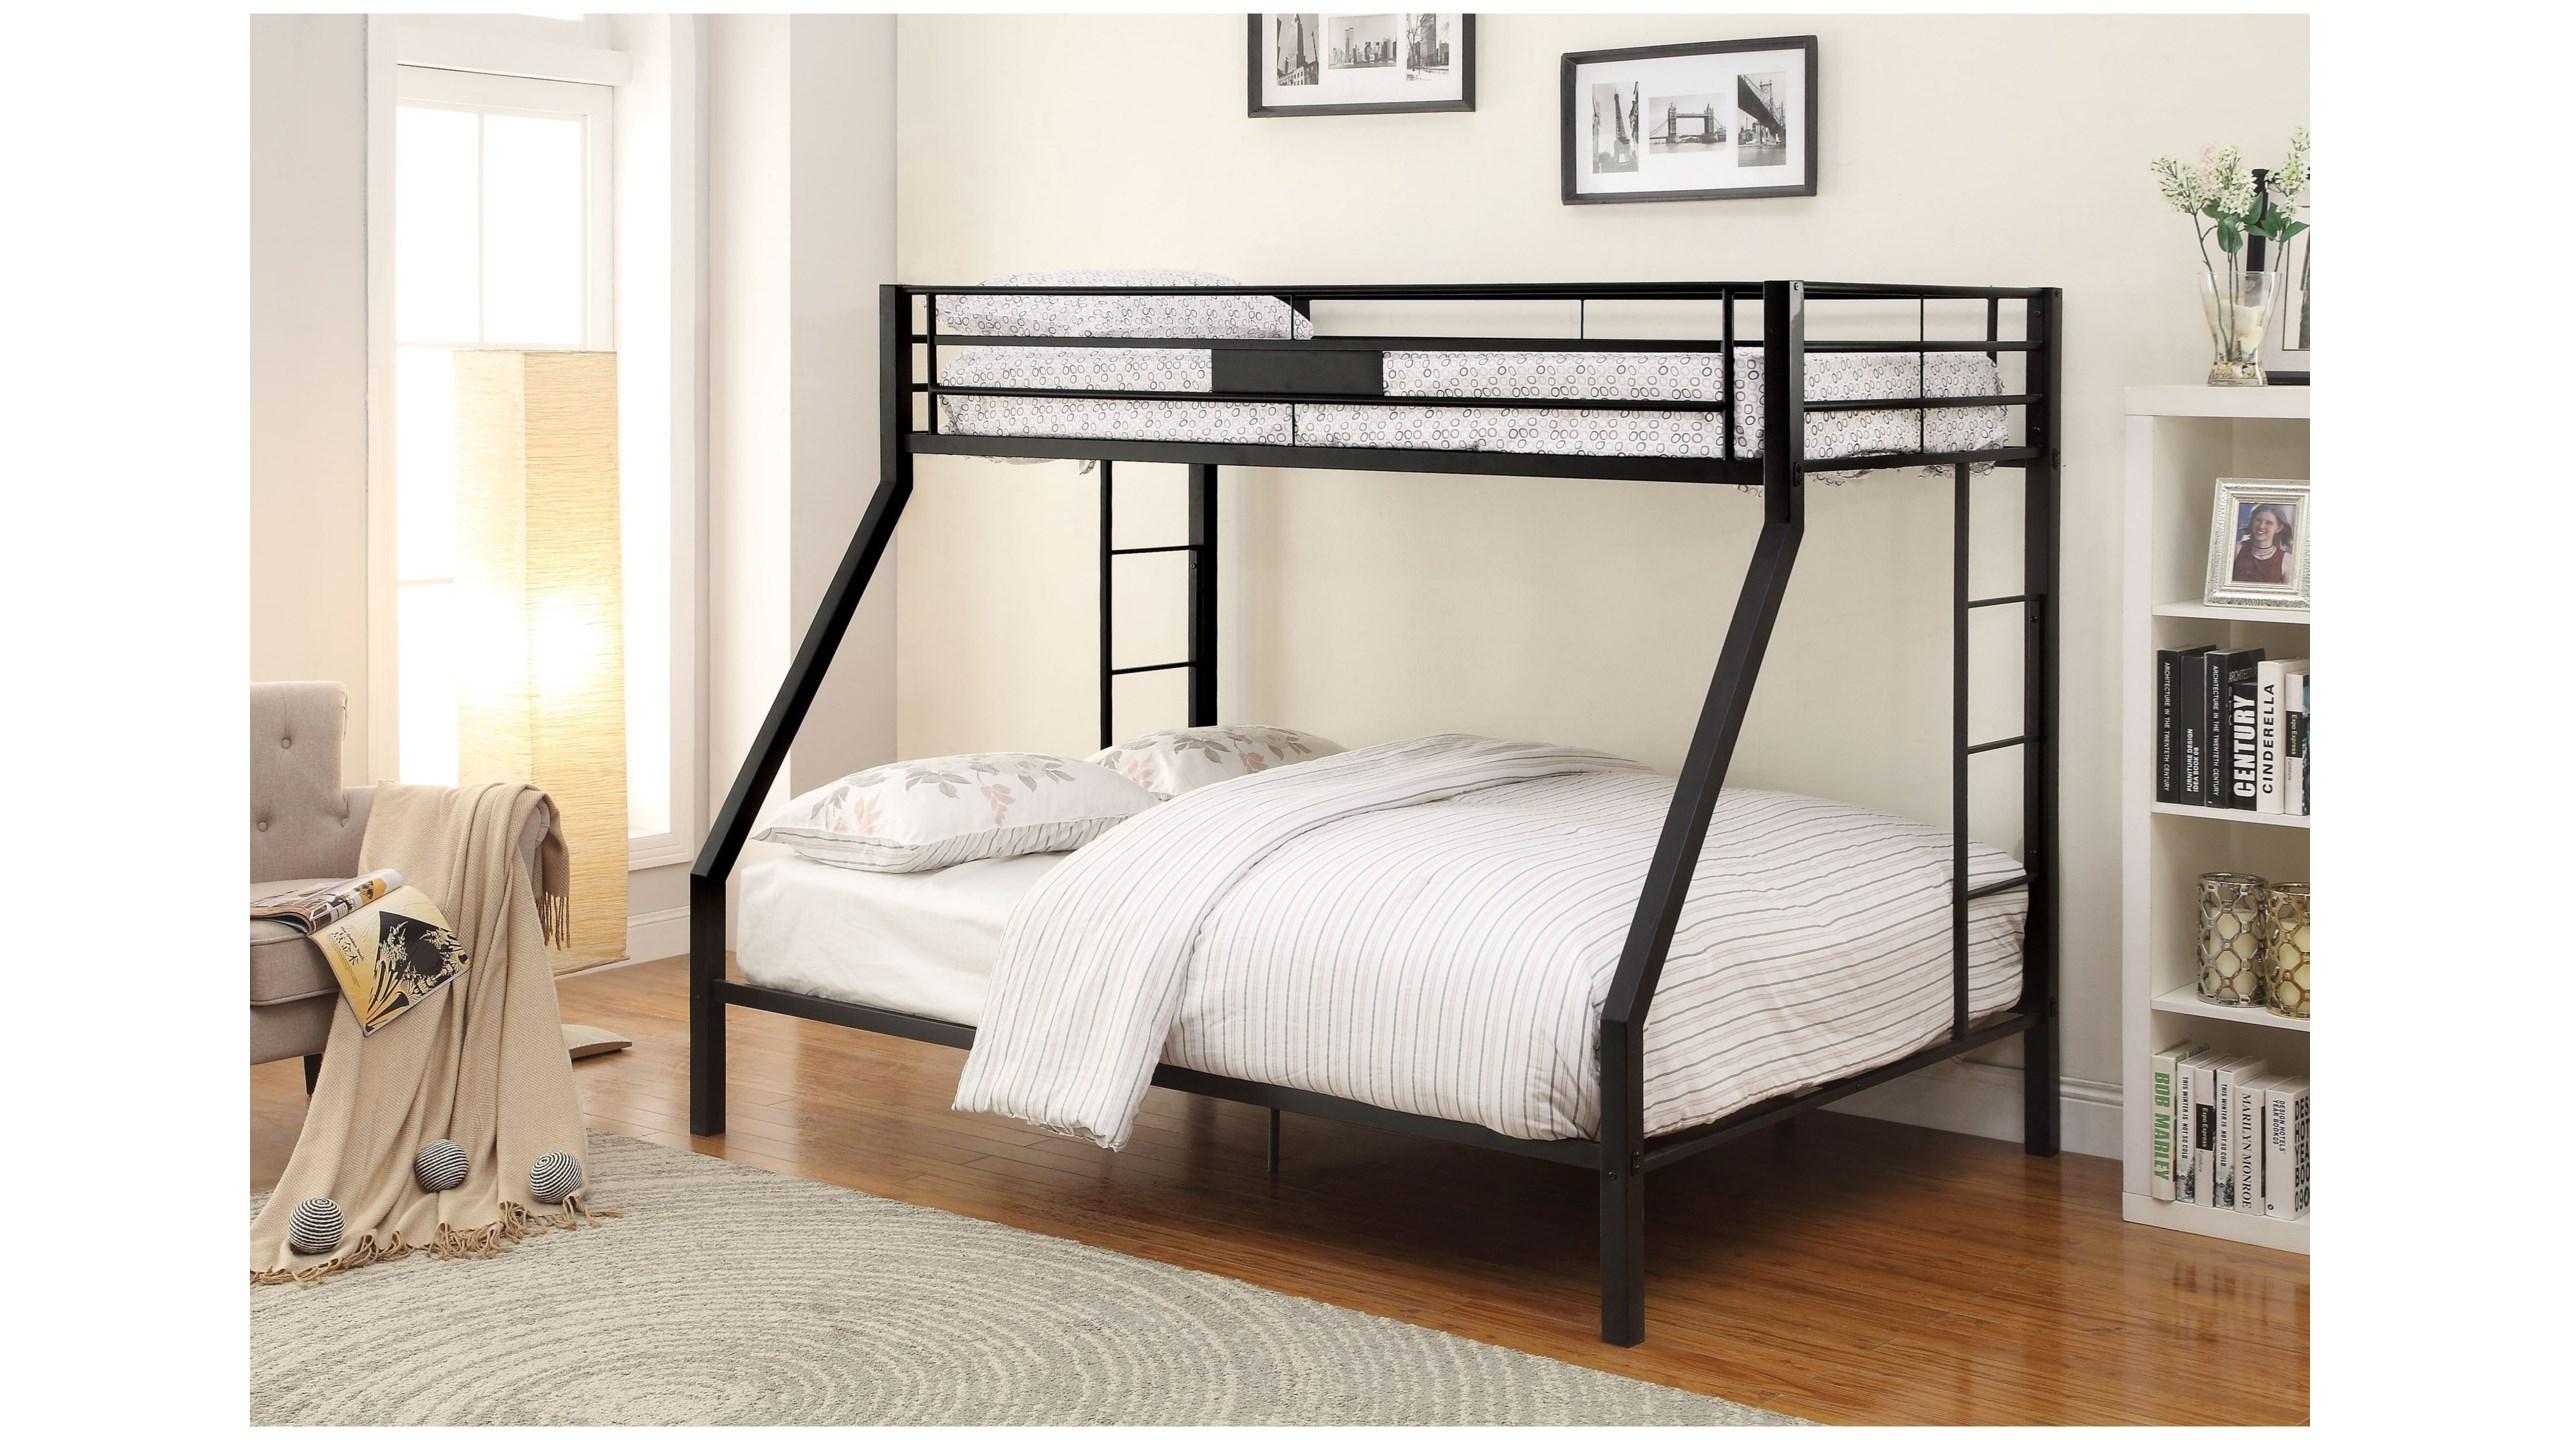 

    
Contemporary Sandy Black Twin XL/Queen Bunk Bed by Acme Limbra 38000
